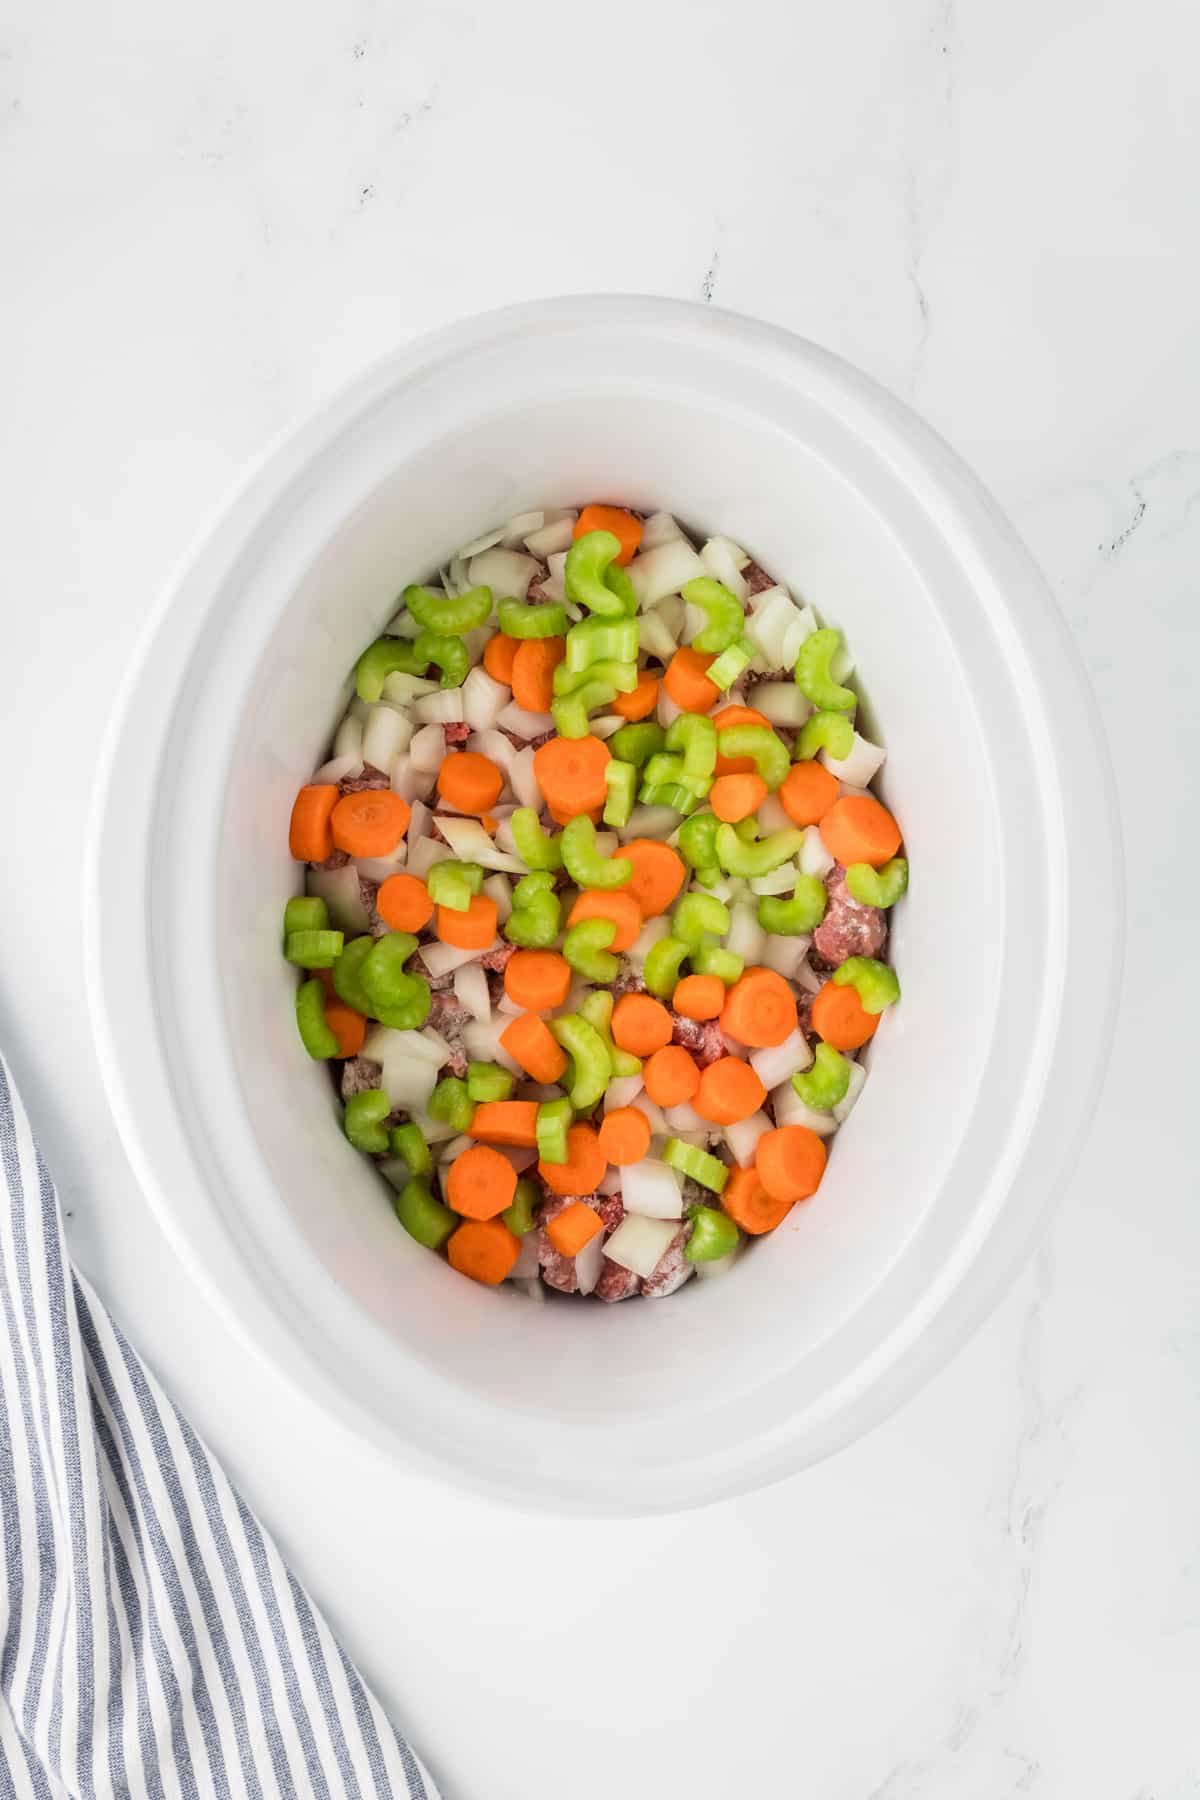 A slow cooker with beef cubes, celery, carrots, and onions layered inside.